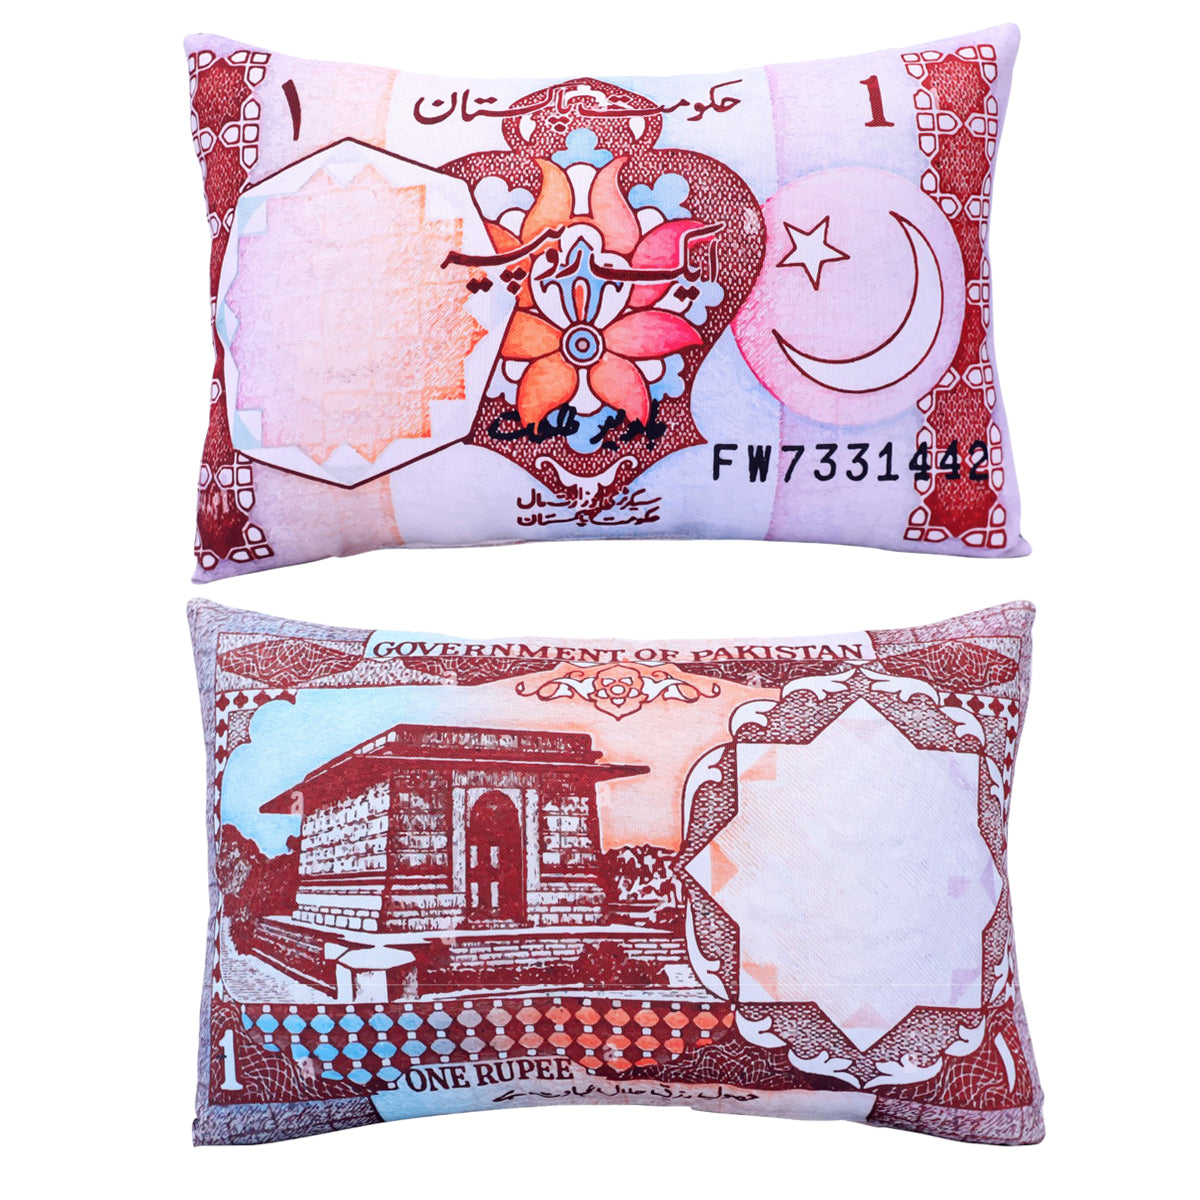 Buy 1 Get One Free - 01 Rupee Cushion Filled 12x18